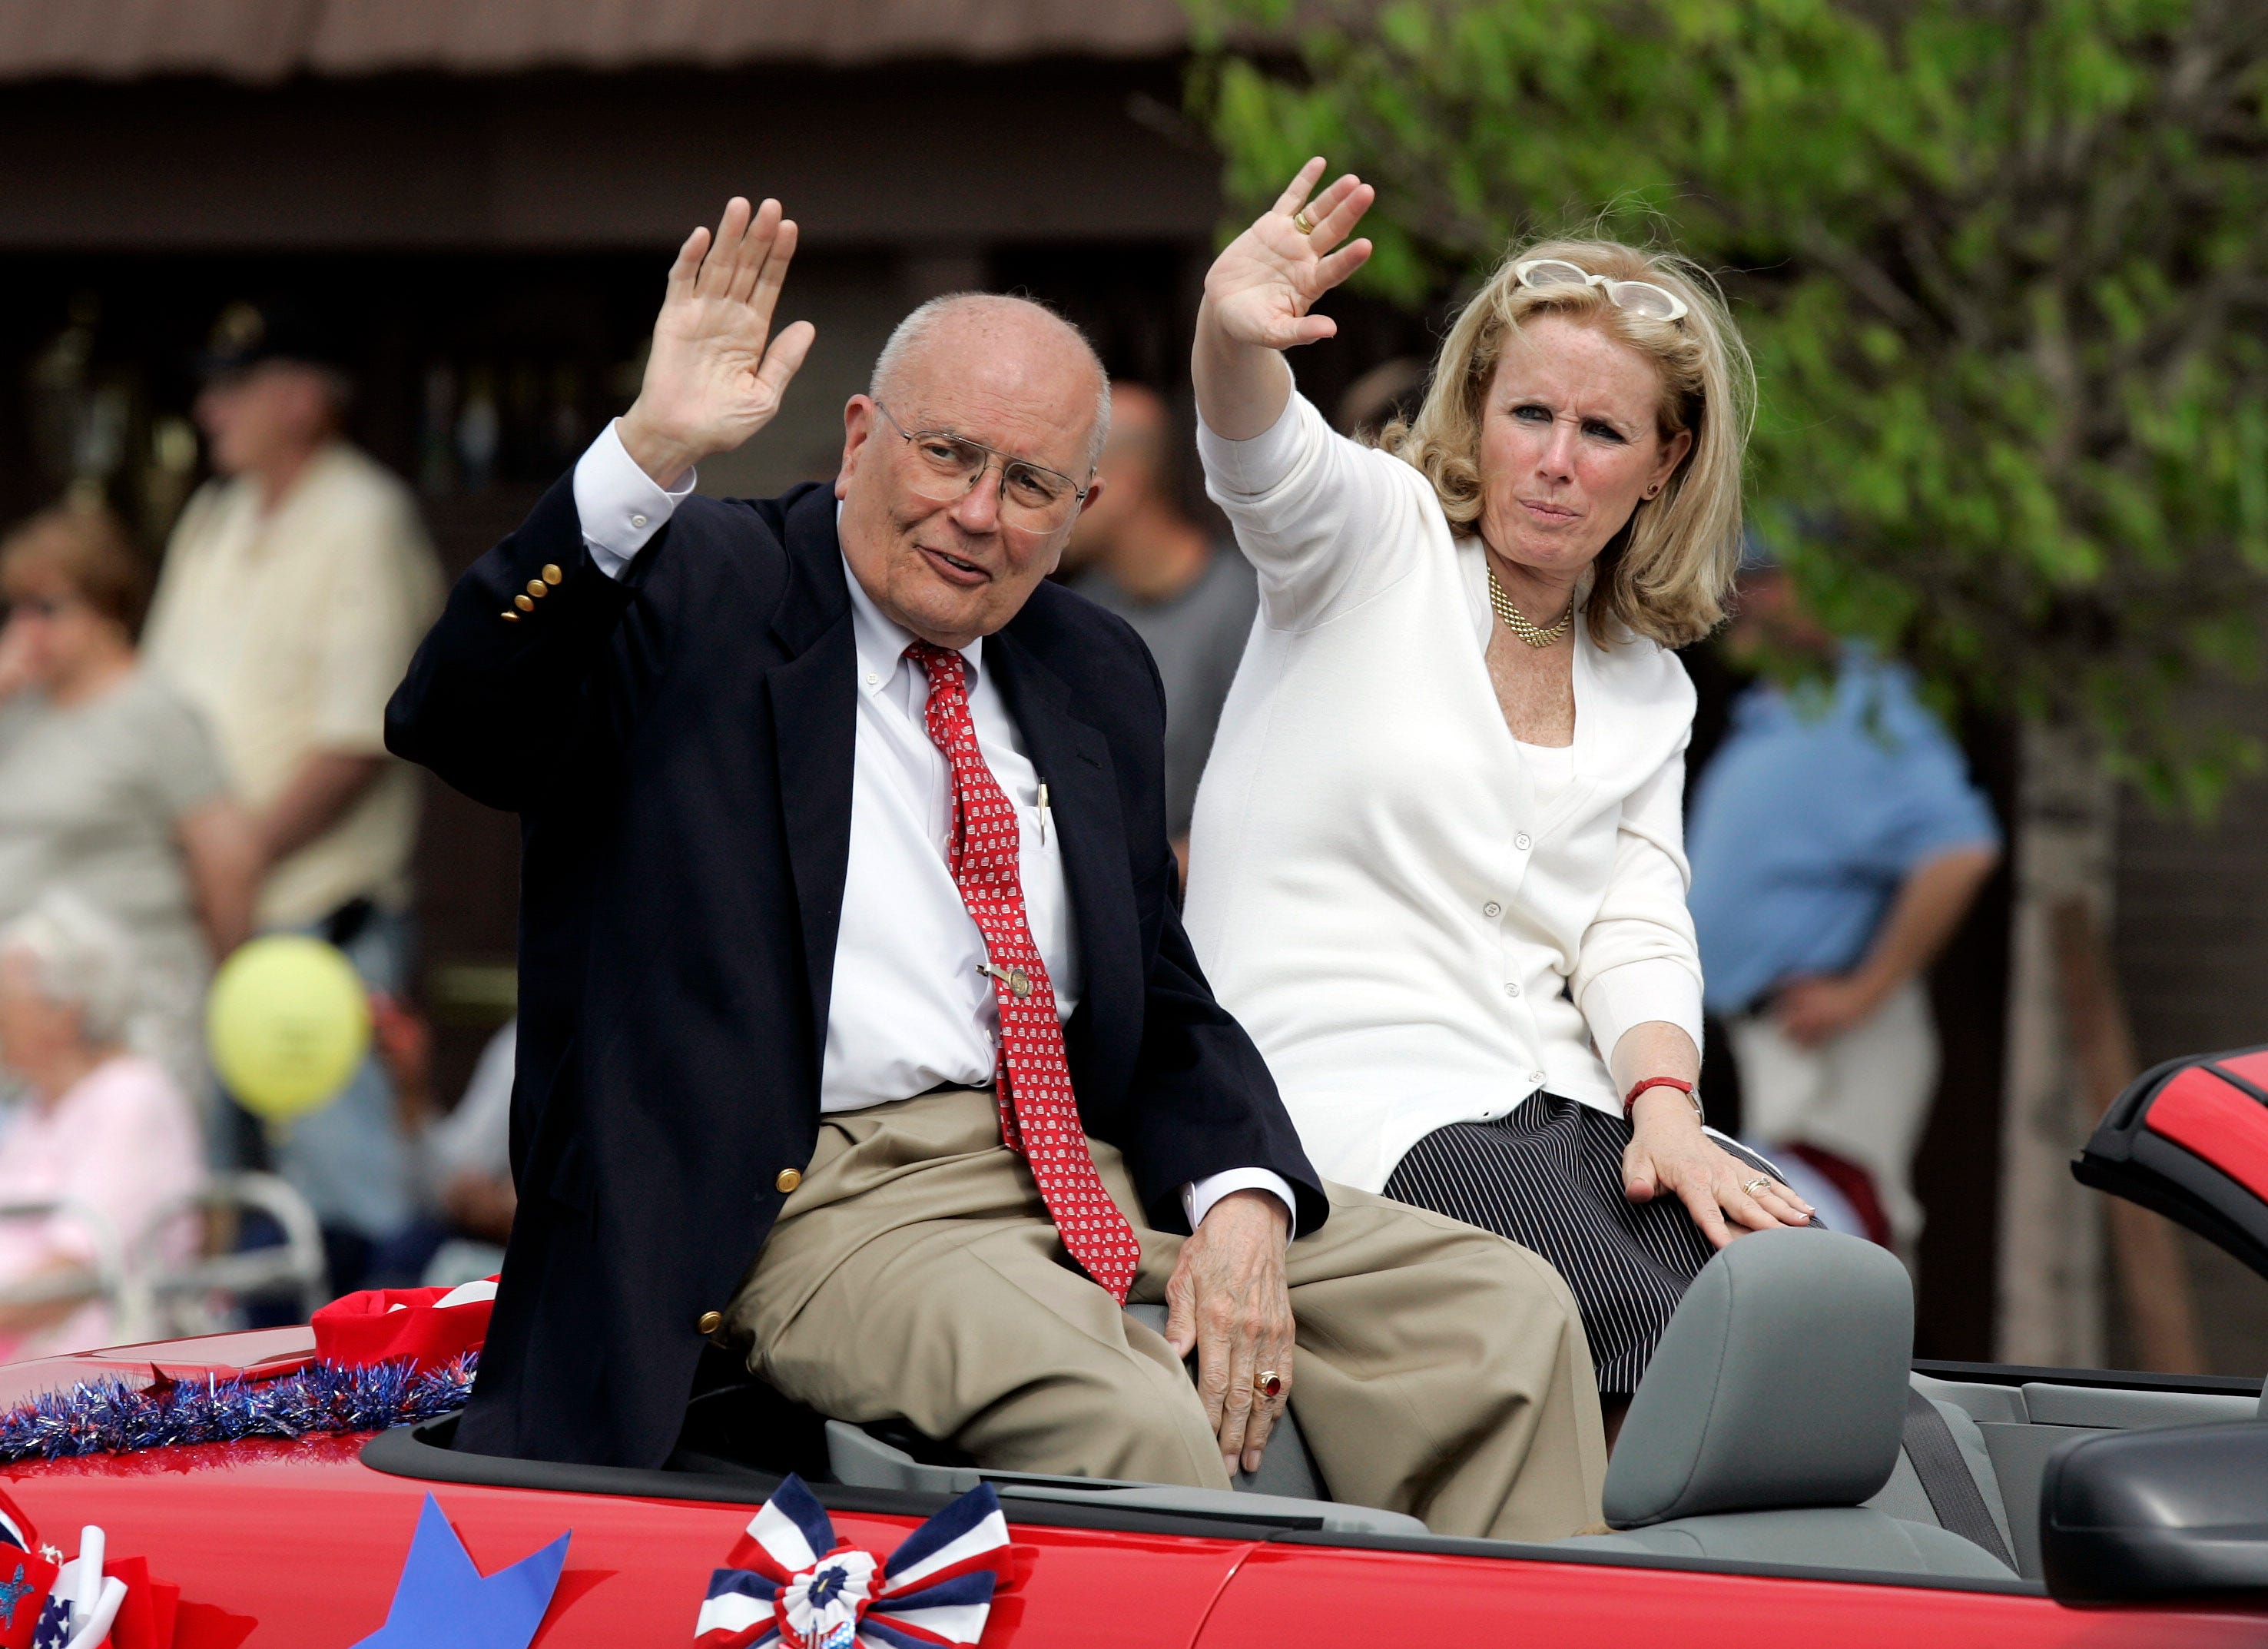 Dingell and his wife Debbie wave to paradegoers during the 84th Annual Memorial Day Parade, May 26, 2008 in downtown Dearborn.